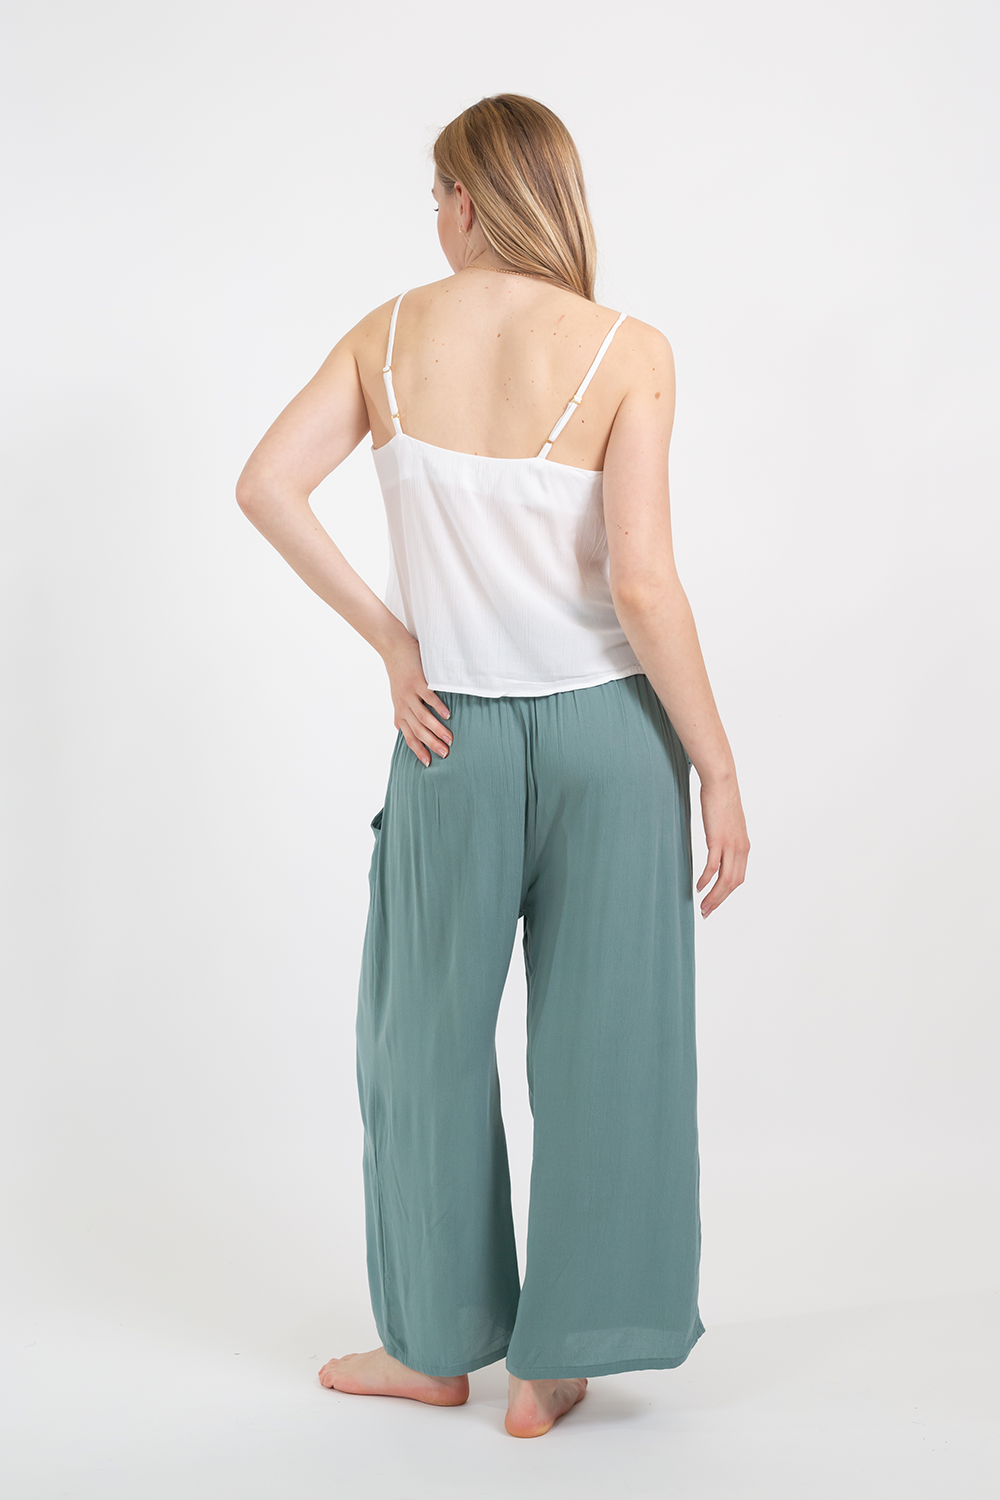 Blonde model wearing the white soft Miami Camisole top with adjustable straps and v-neckline facing back. Paired with crinkle rayon jade green Miami pants by Koy Resort Cruise summer beachwear collection.